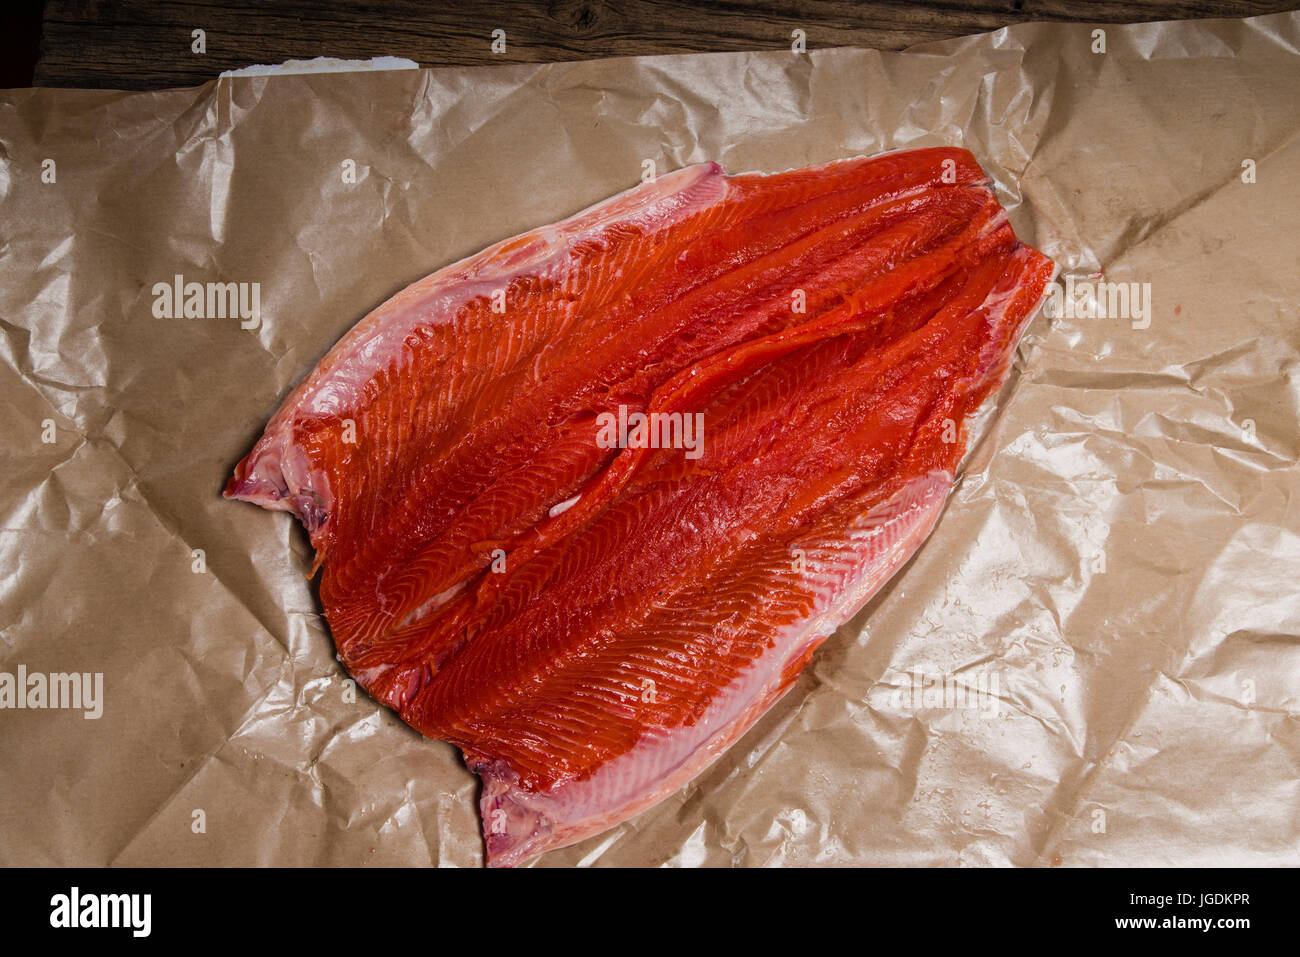 Steelhead trout fresh from the market ready to grill Stock Photo